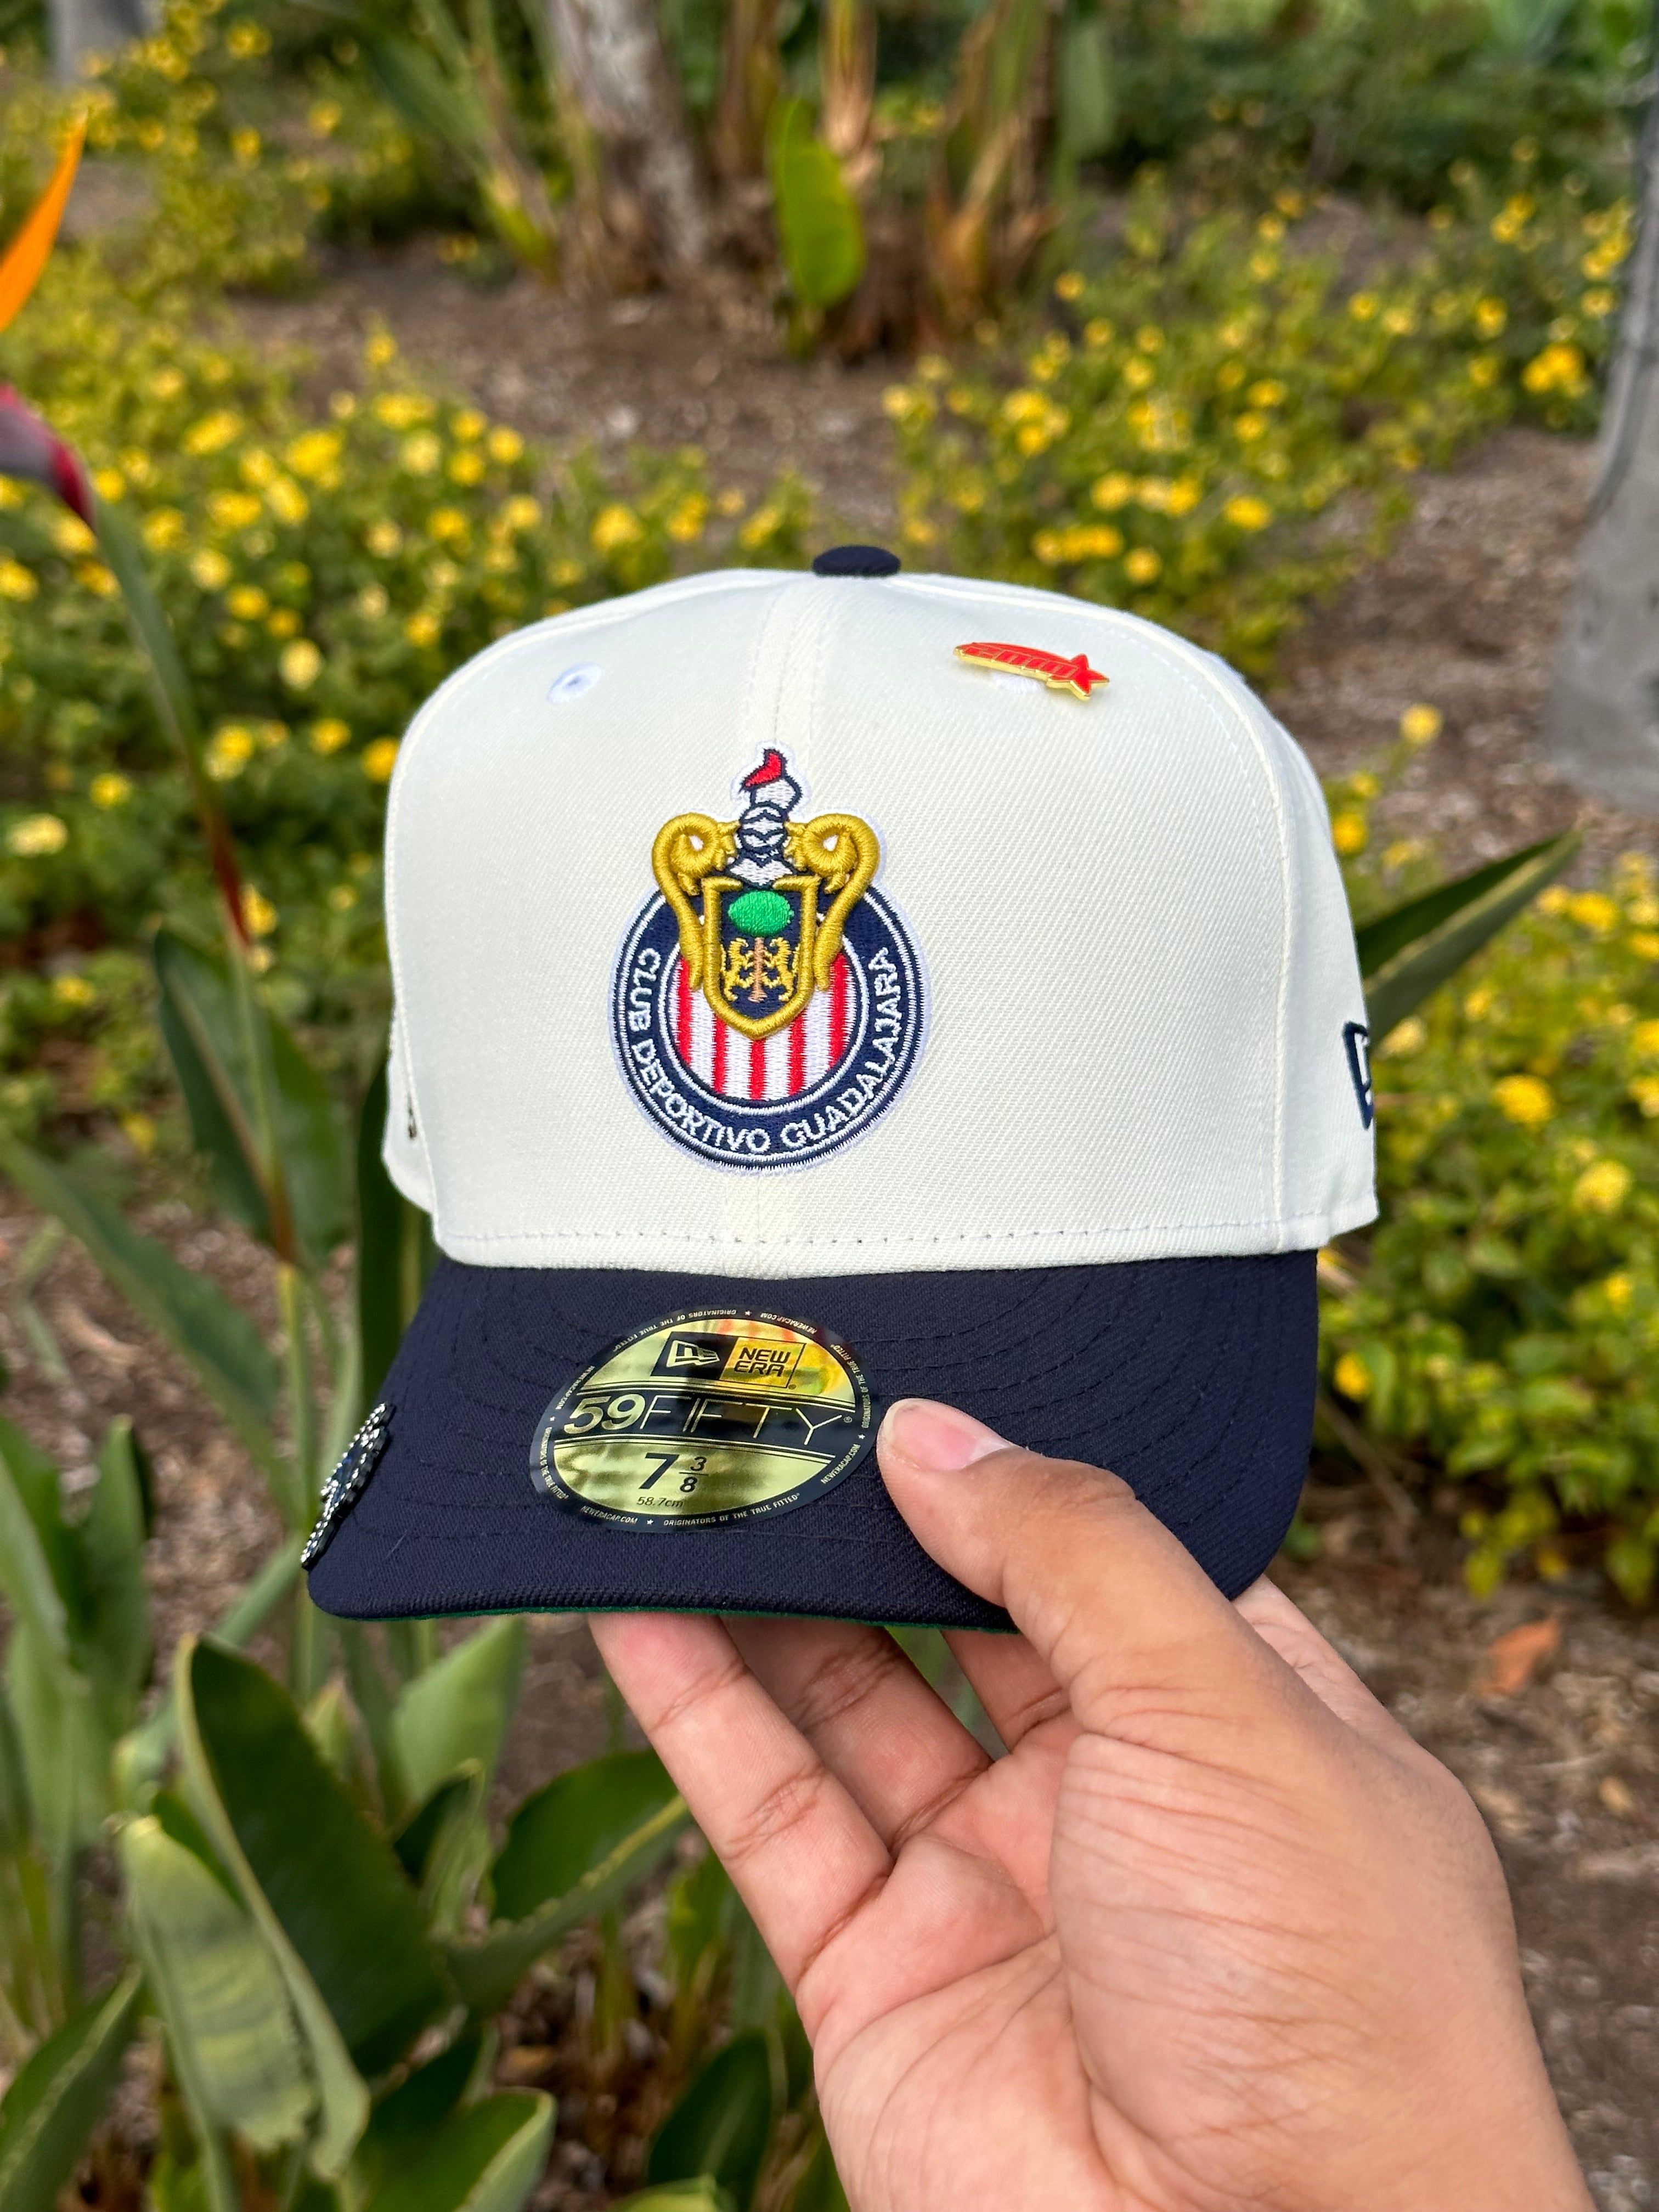 PRE ORDER NEW ERA EXCLUSIVE 59FIFTY WHITE/NAVY "CHIVAS DE GUADALAJARA" W/ THE GOAT SIDE PATCH -SHIP DATE AUGUST 27TH (FINAL SALE)